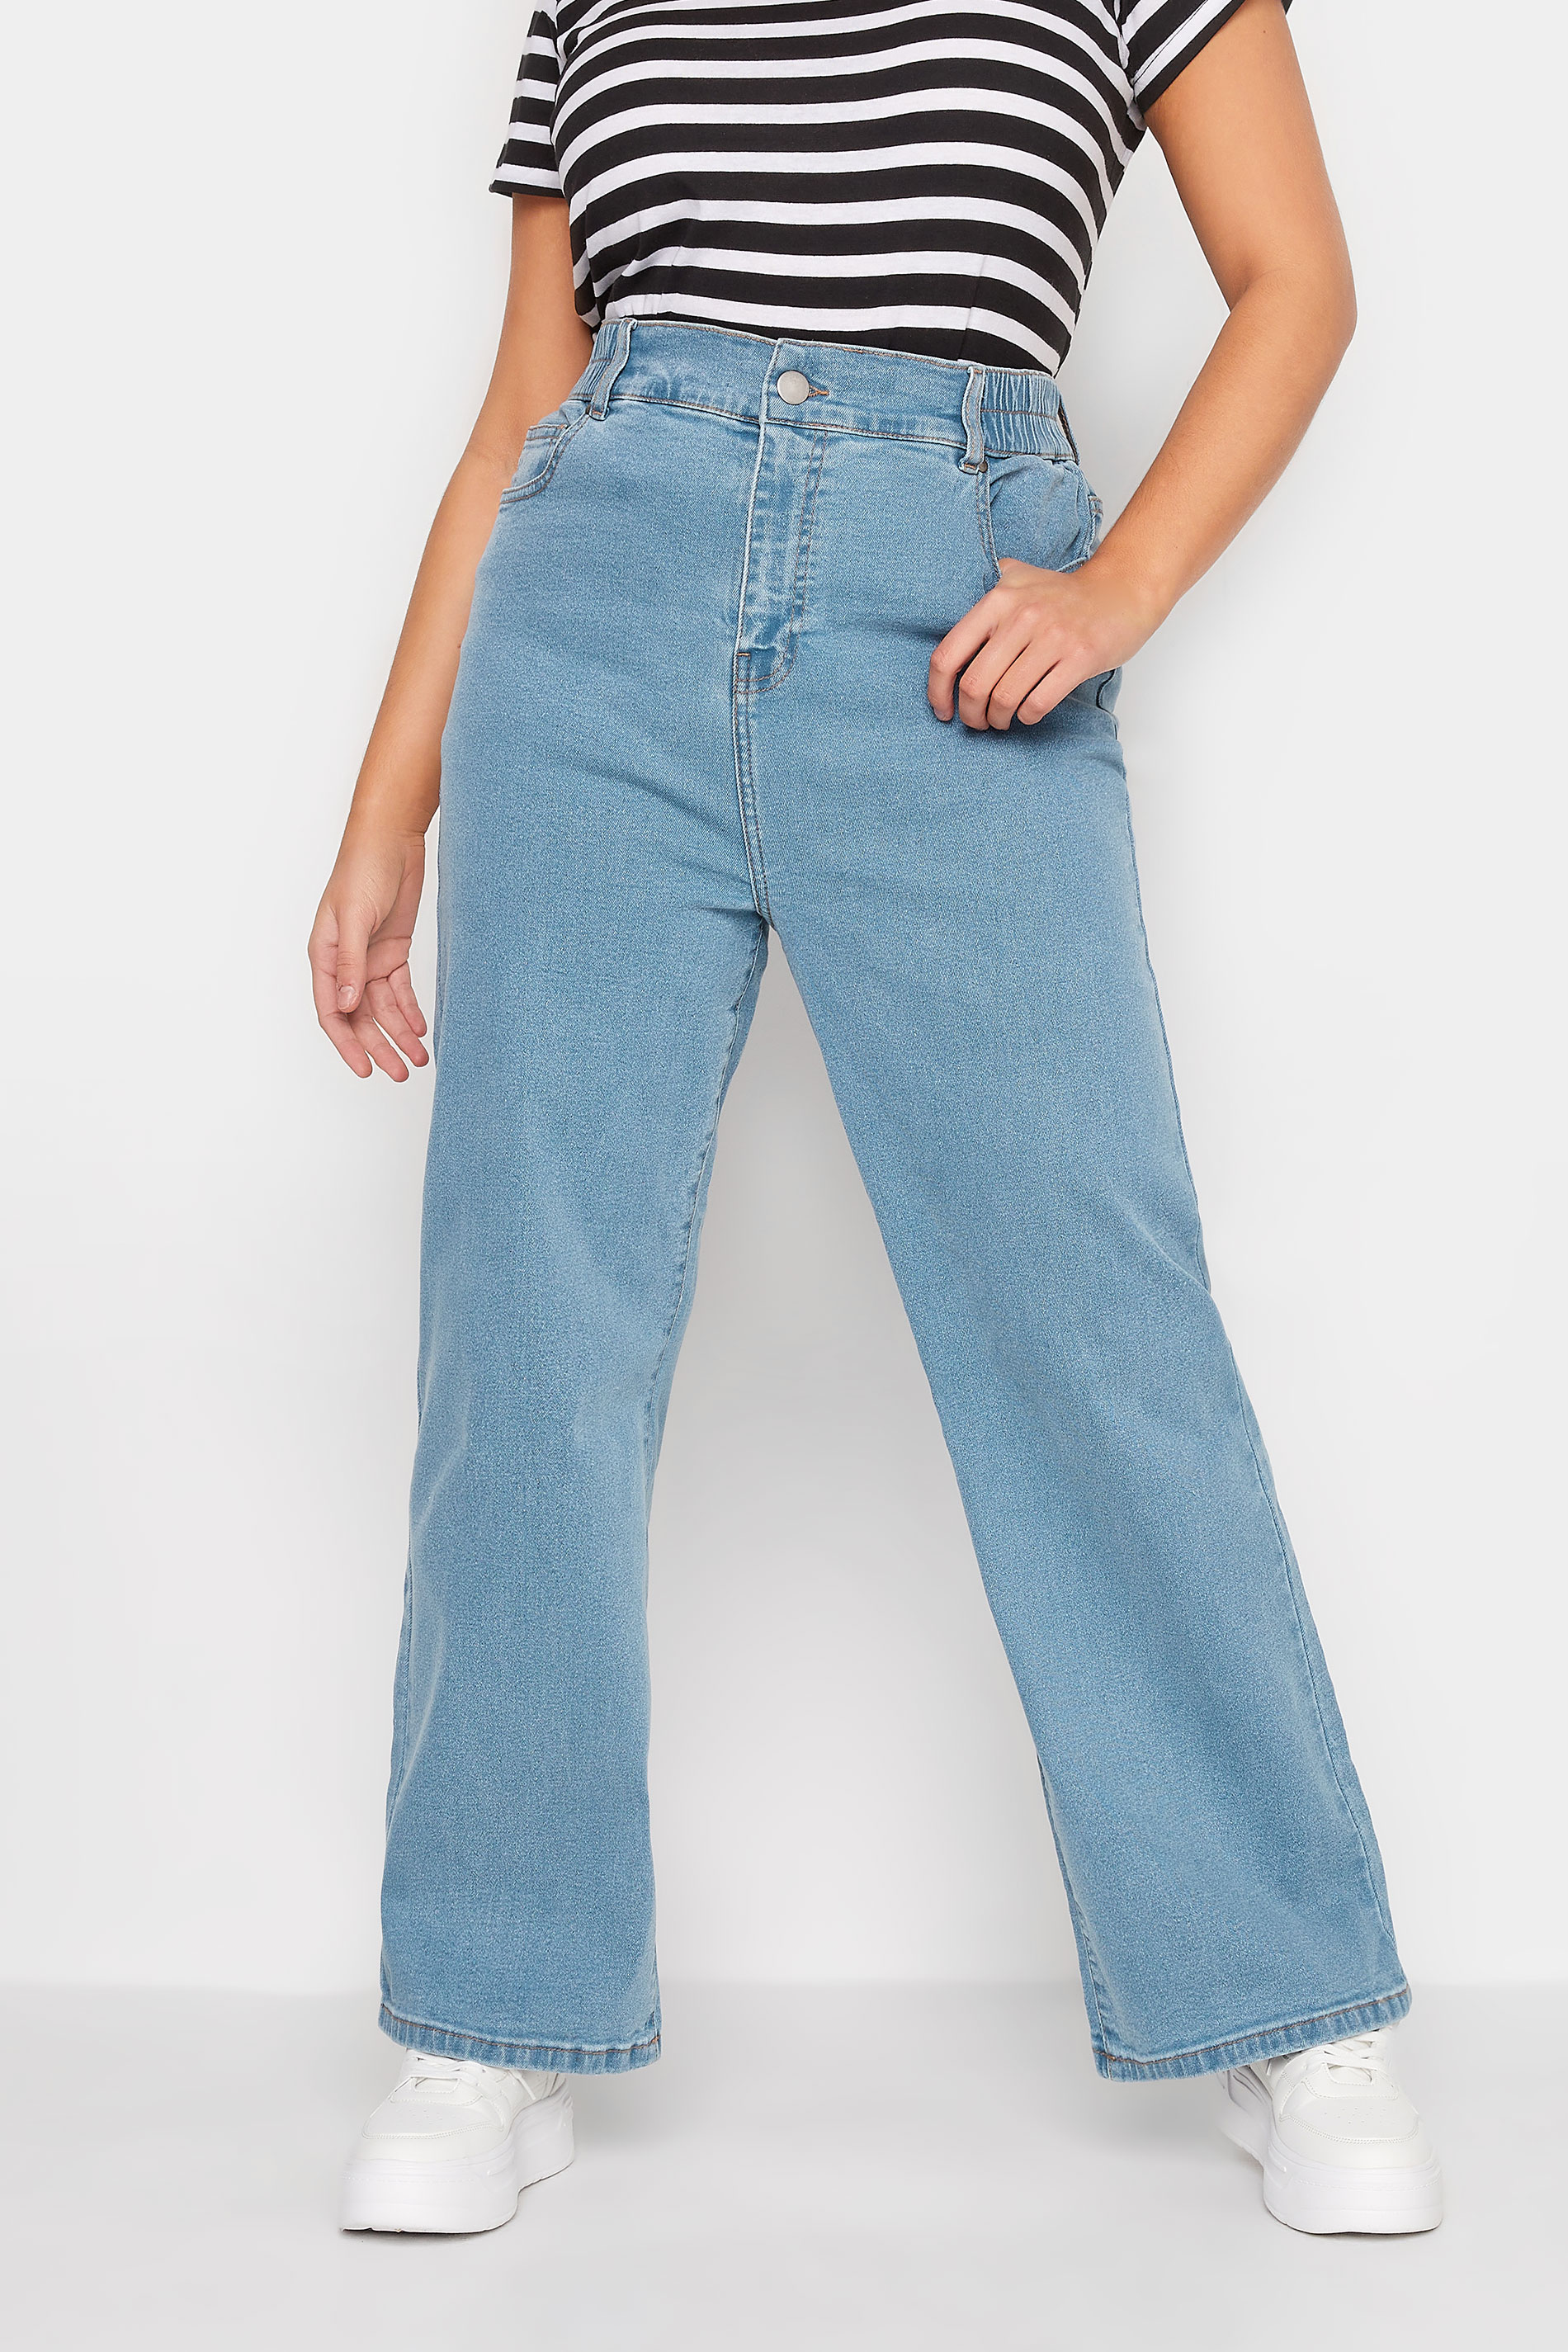 YOURS Plus Size Light Blue Elasticated Waist Stretch Wide Leg Jeans | Yours Clothing  1